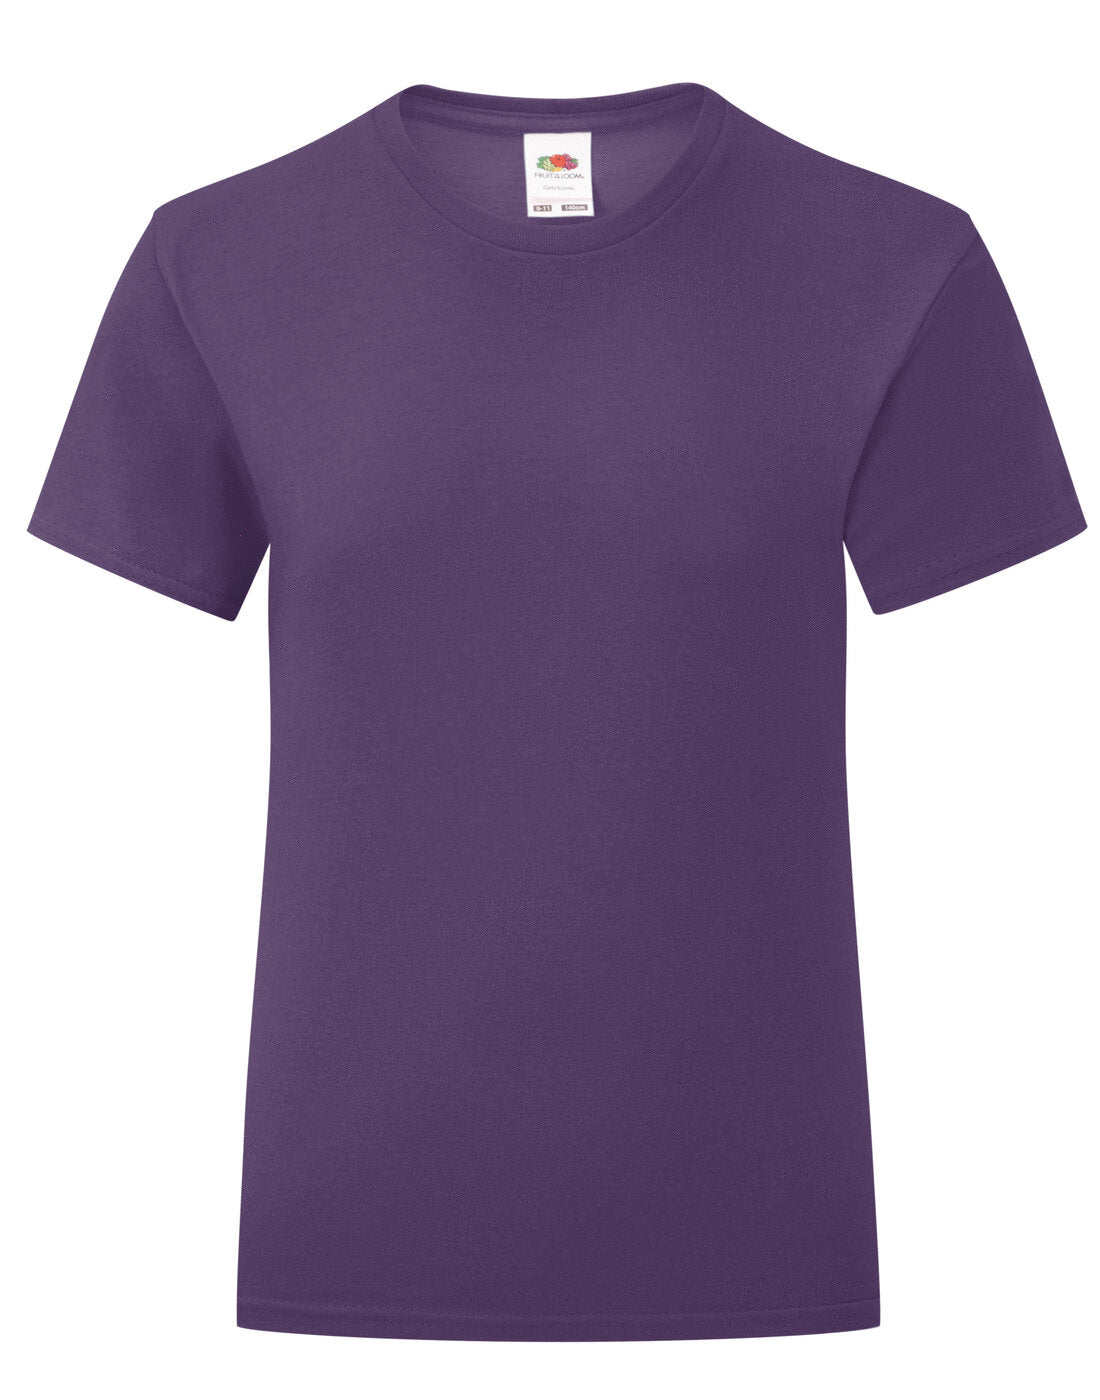 Fruit of the Loom Girls Iconic T - Purple